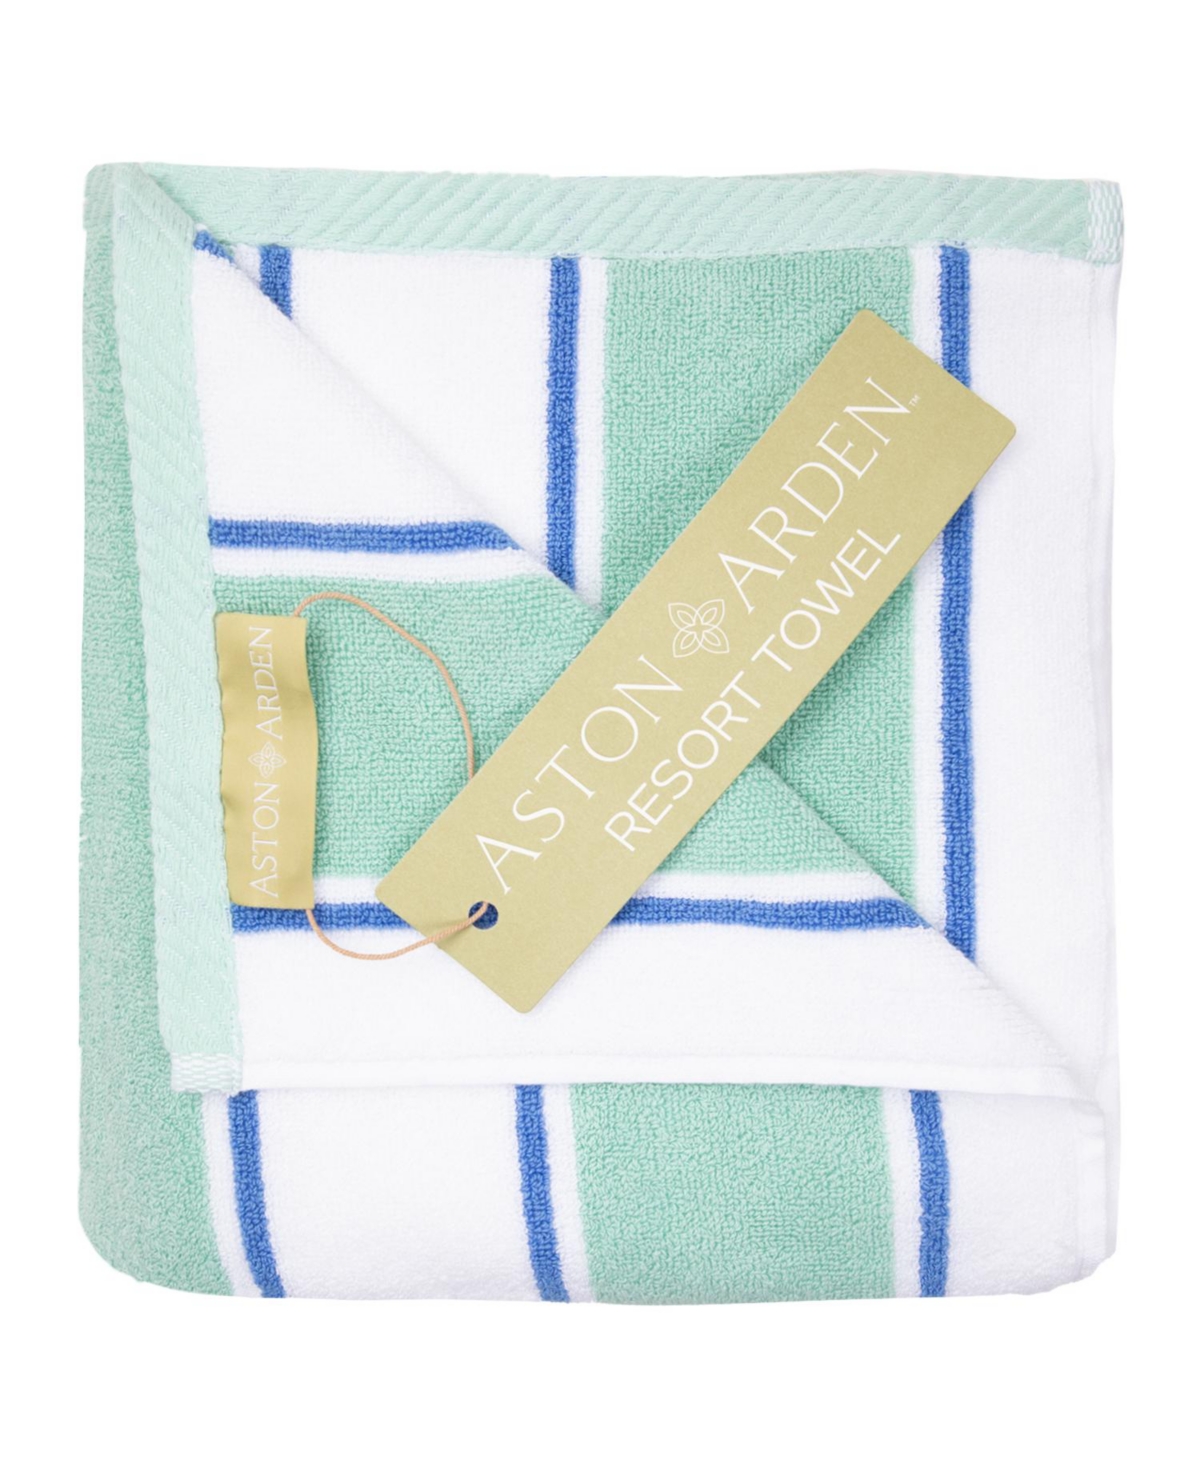 Aston And Arden Oversized Extra Thick Luxury Beach Towel (35x70 In., 600 Gsm), Pinstriped, Soft Ring Spun Cotton Res In Green/blue